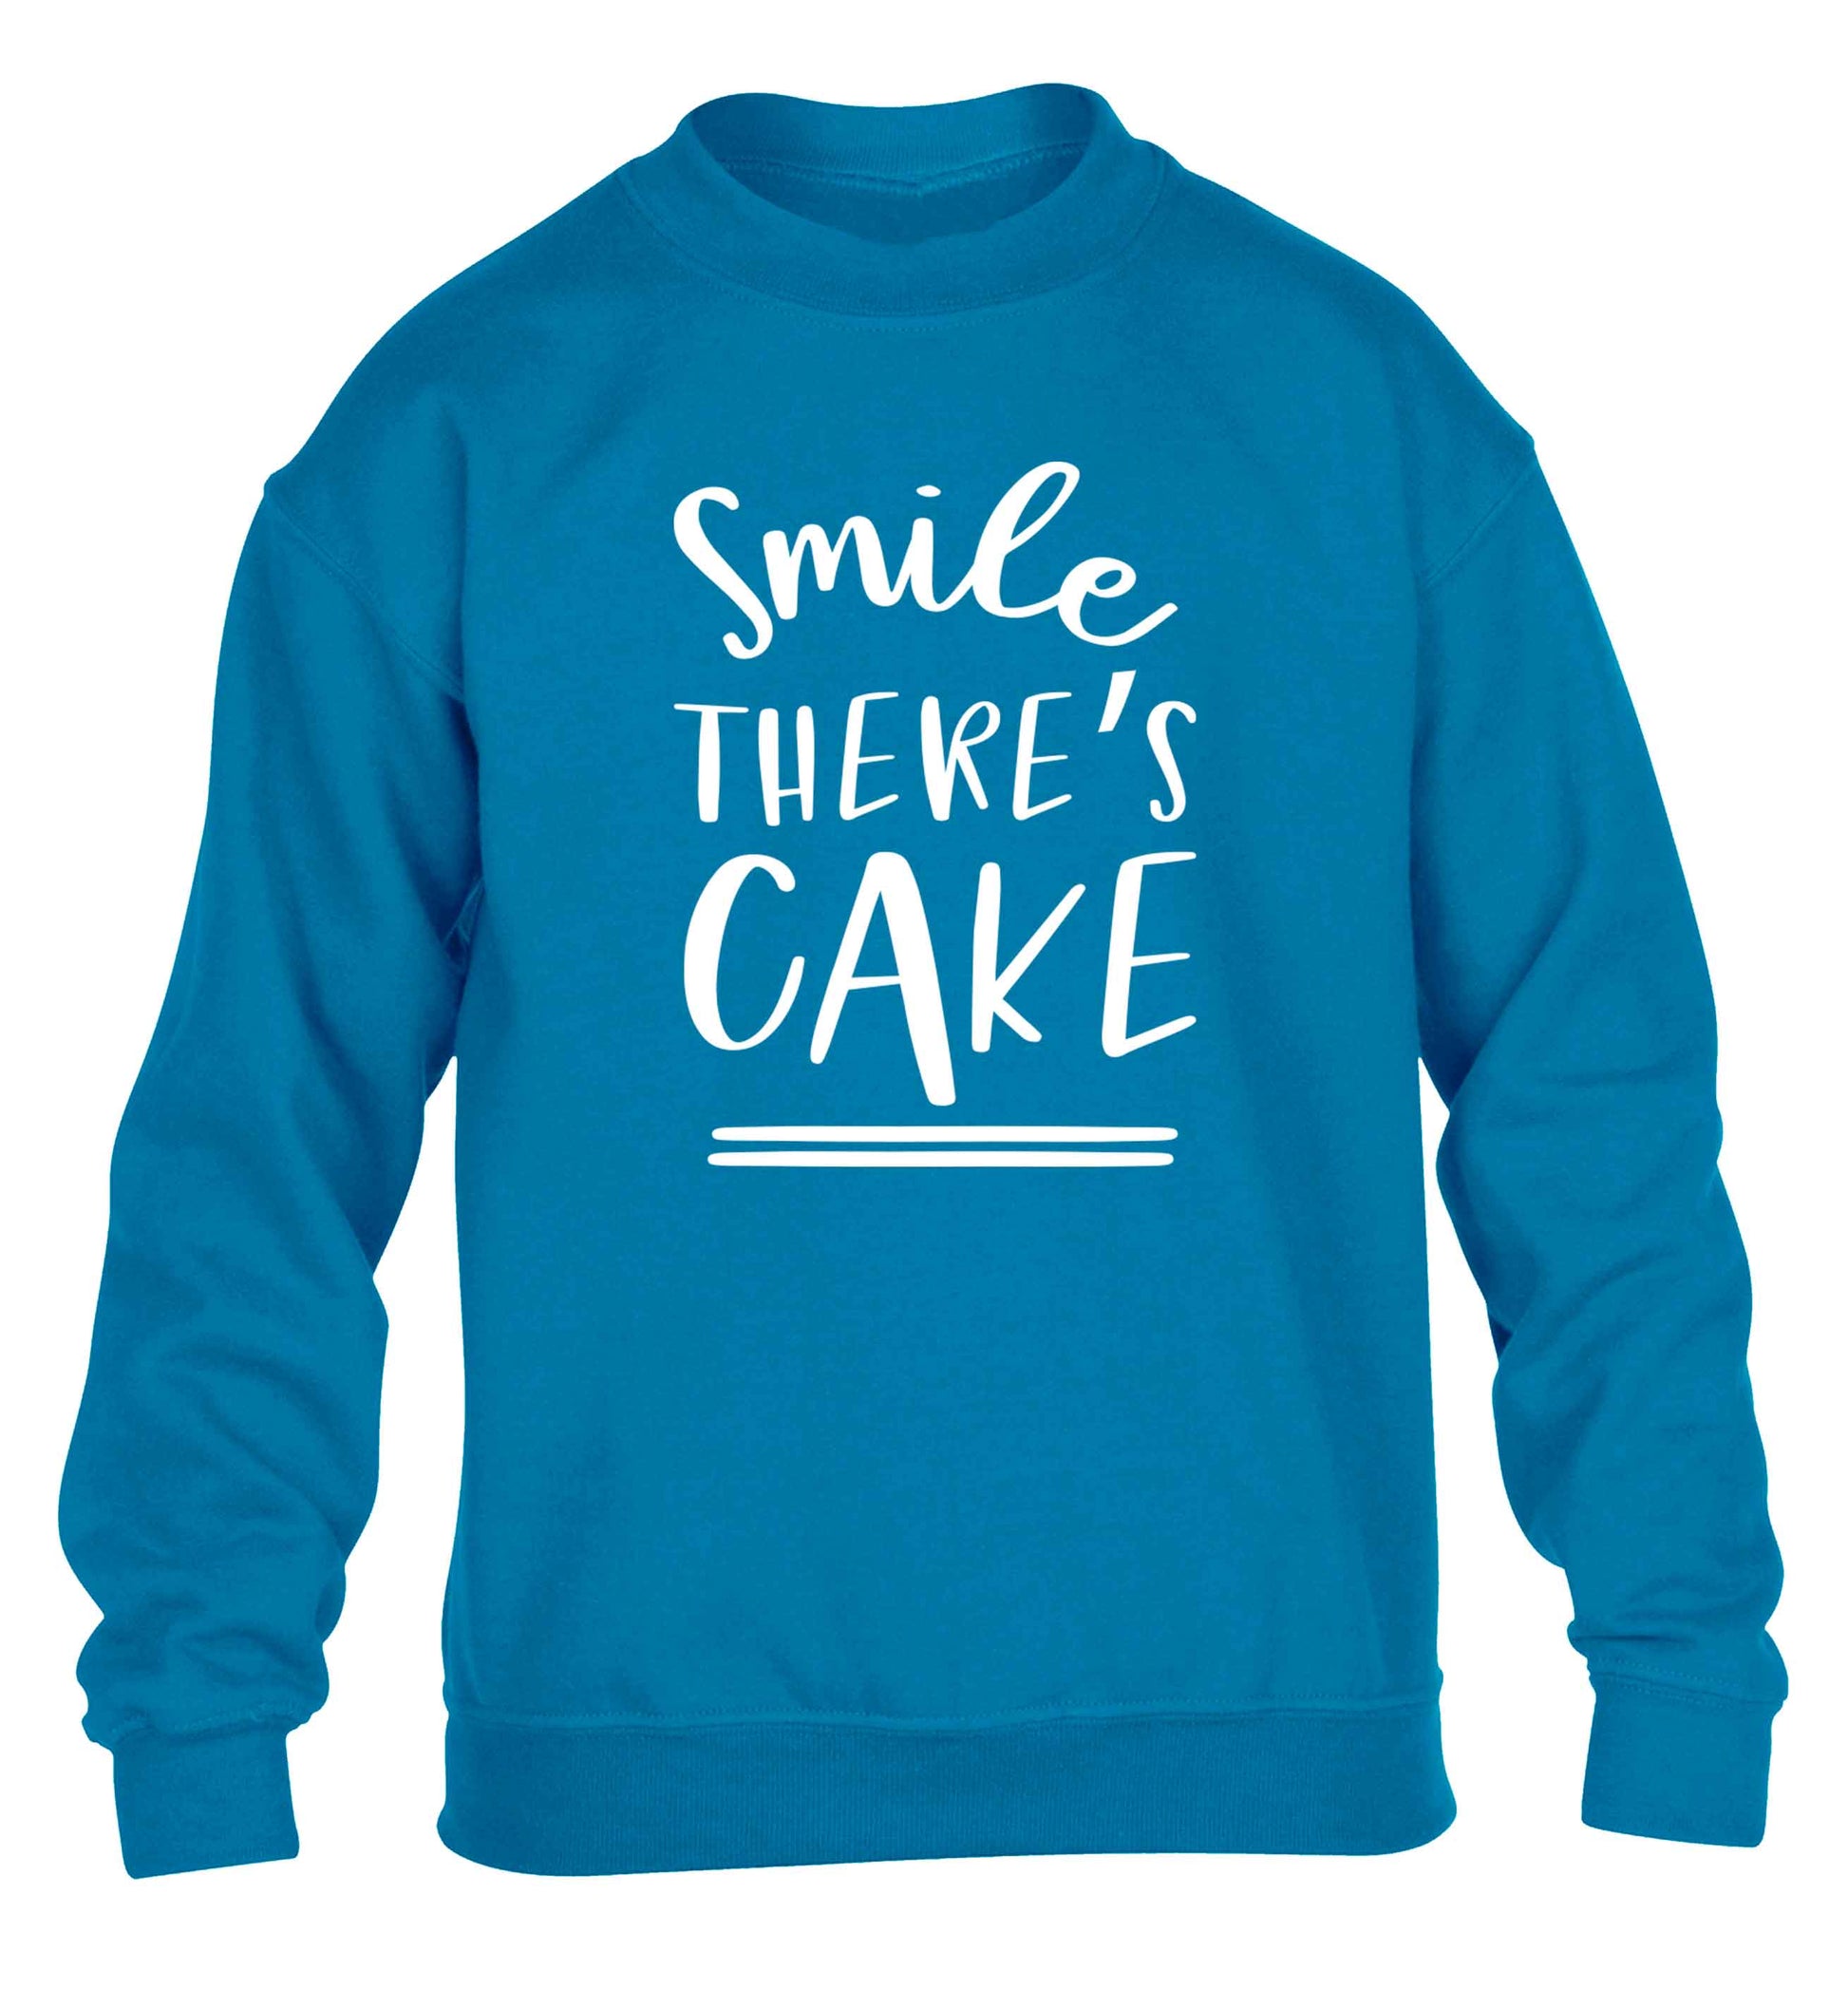 Smile there's cake children's blue sweater 12-13 Years